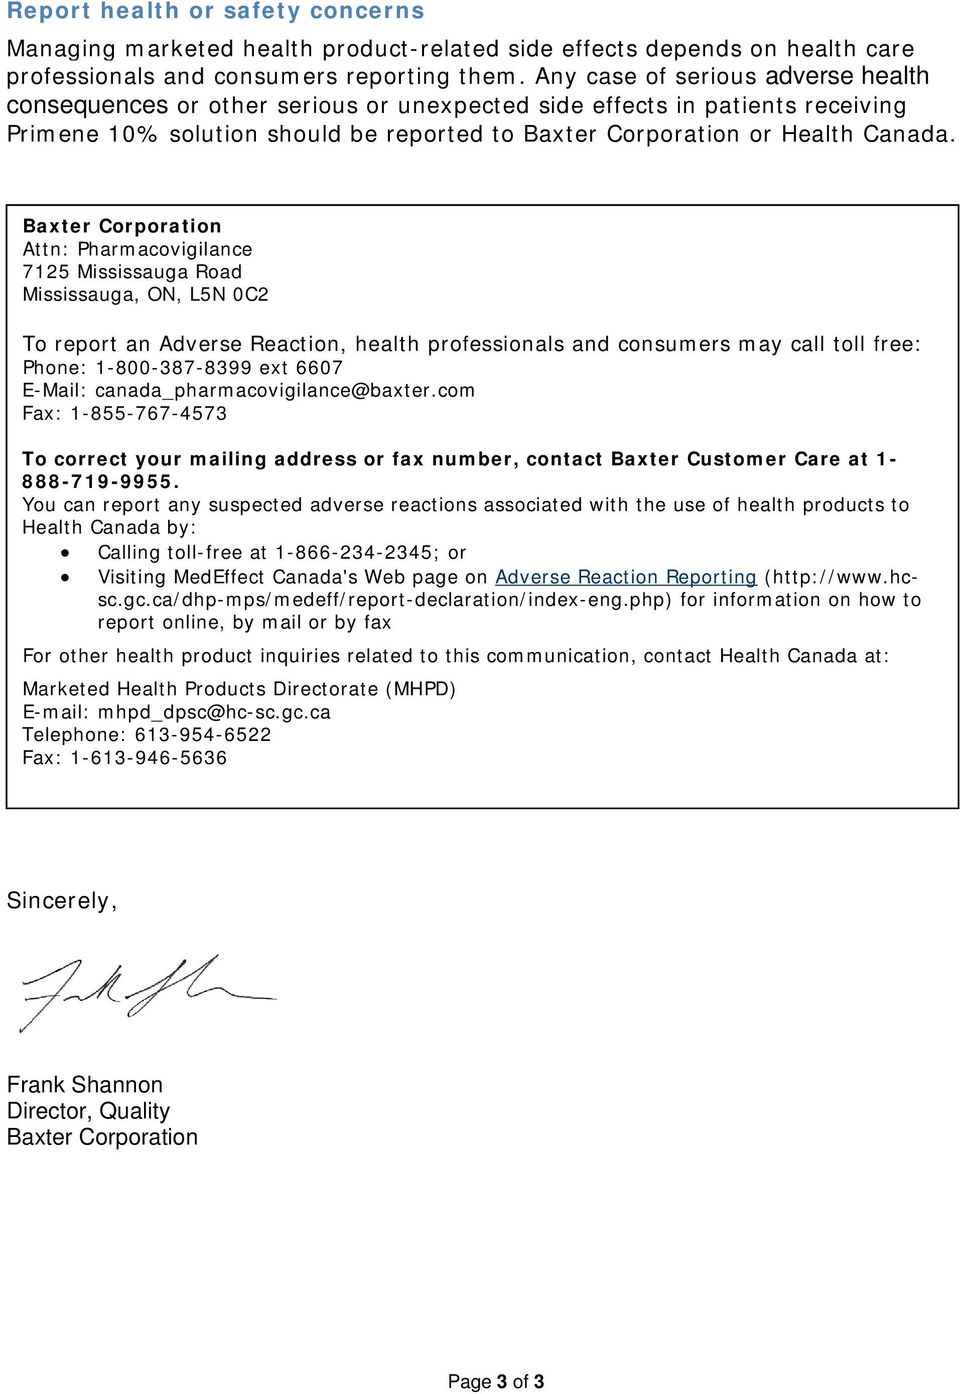 Baxter Corporation Attn: Pharmacovigilance 7125 Mississauga Road Mississauga, ON, L5N 0C2 To report an Adverse Reaction, health professionals and consumers may call toll free: Phone: 1-800-387-8399